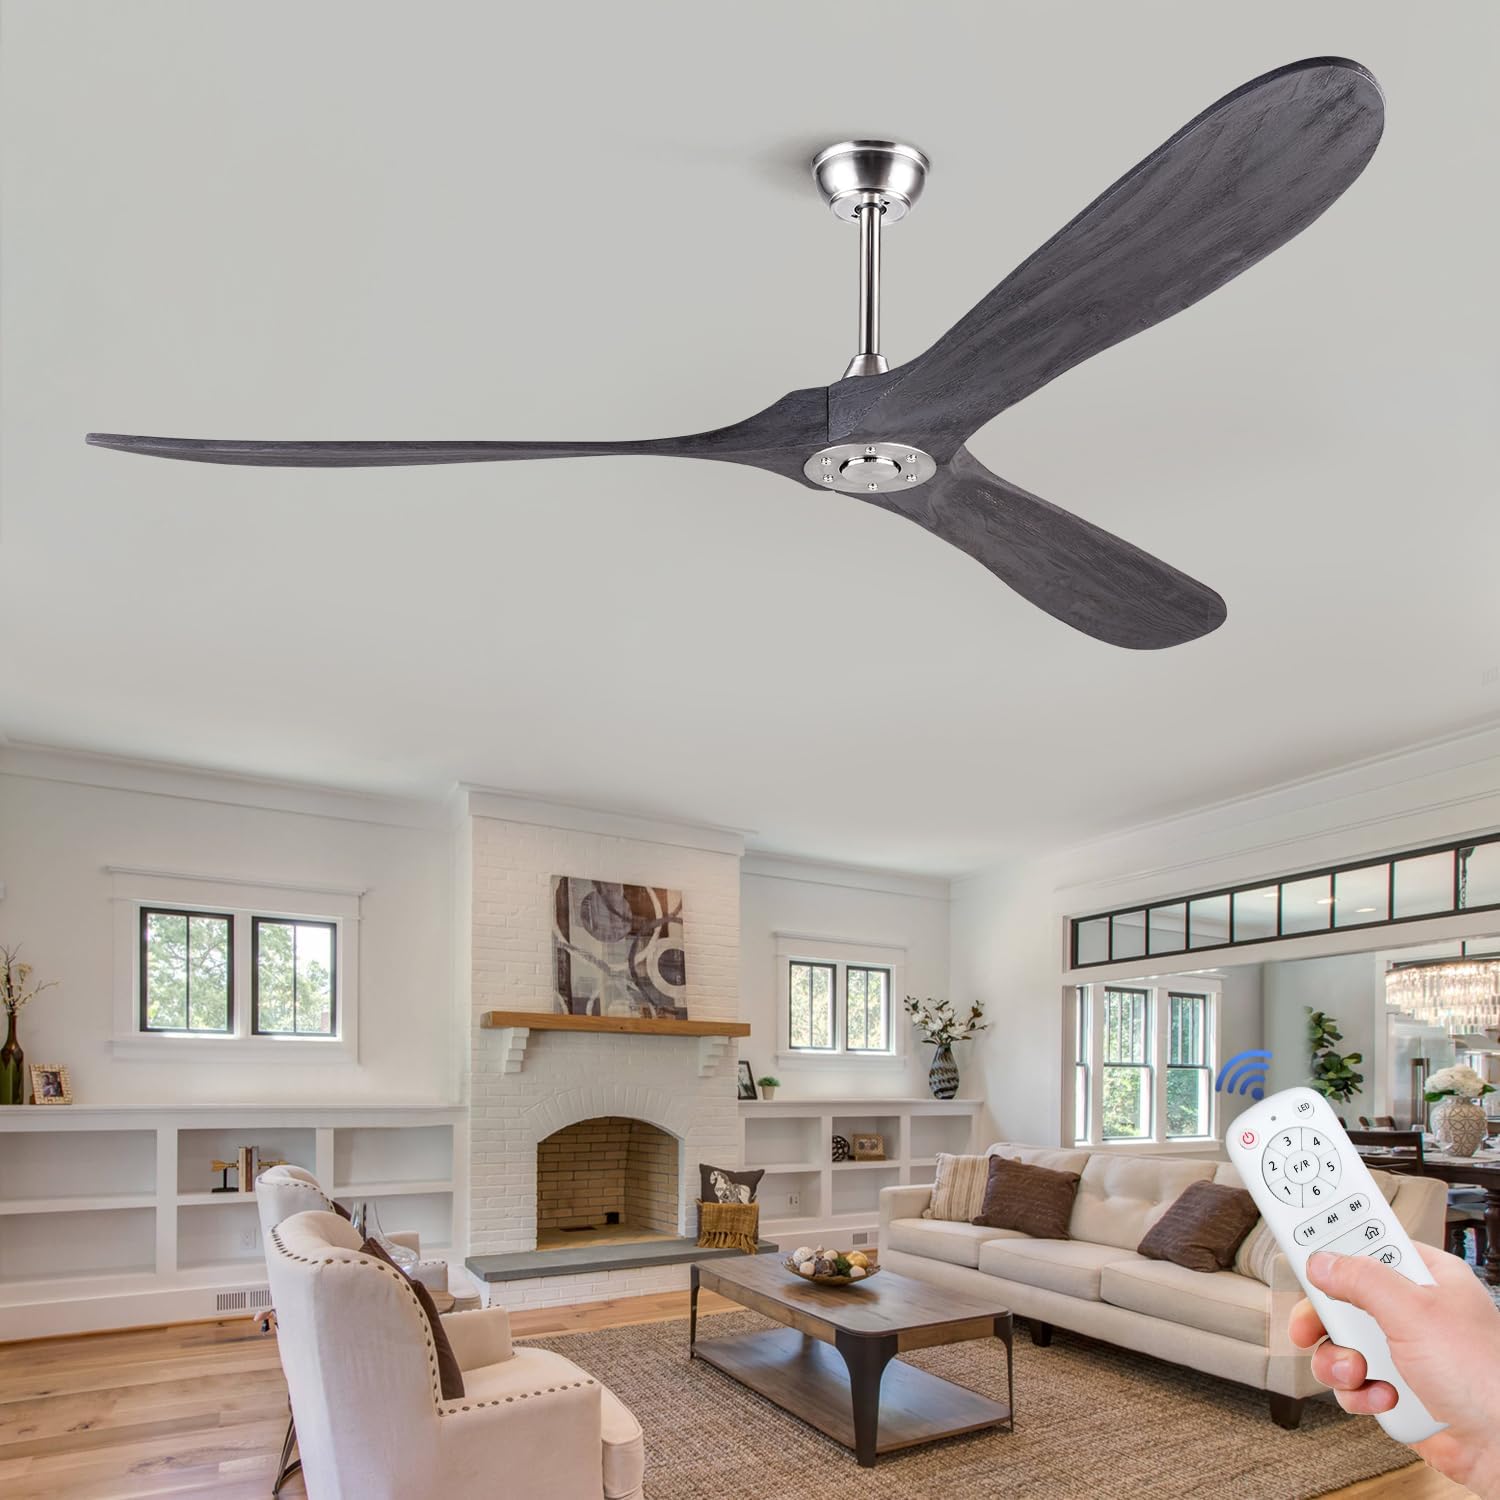 BOJUE 72 inch Wood Ceiling Fans Without Light, Low Profile Ceiling Fan with Remote Control Indoor Outdoor Fan Light with 3 blade for Farmhouse Patio Living Room, Bedroom, Office (Gray Drawing Lines)